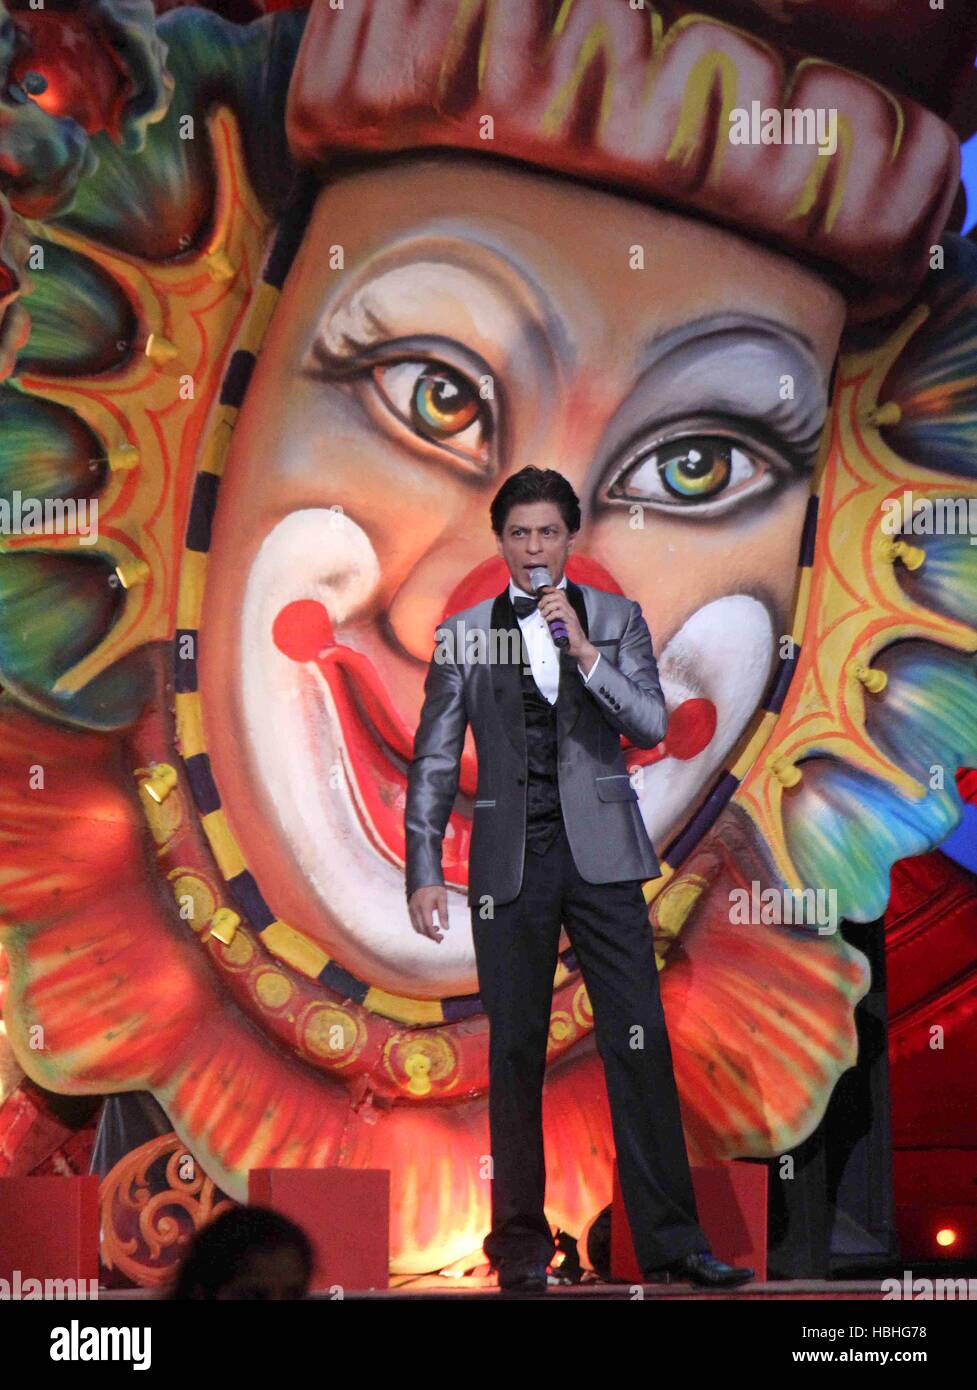 Shahrukh Khan in front of Joker poster, Indian Bollywood actor at Got Talent World Stage television show in Mumbai India Stock Photo